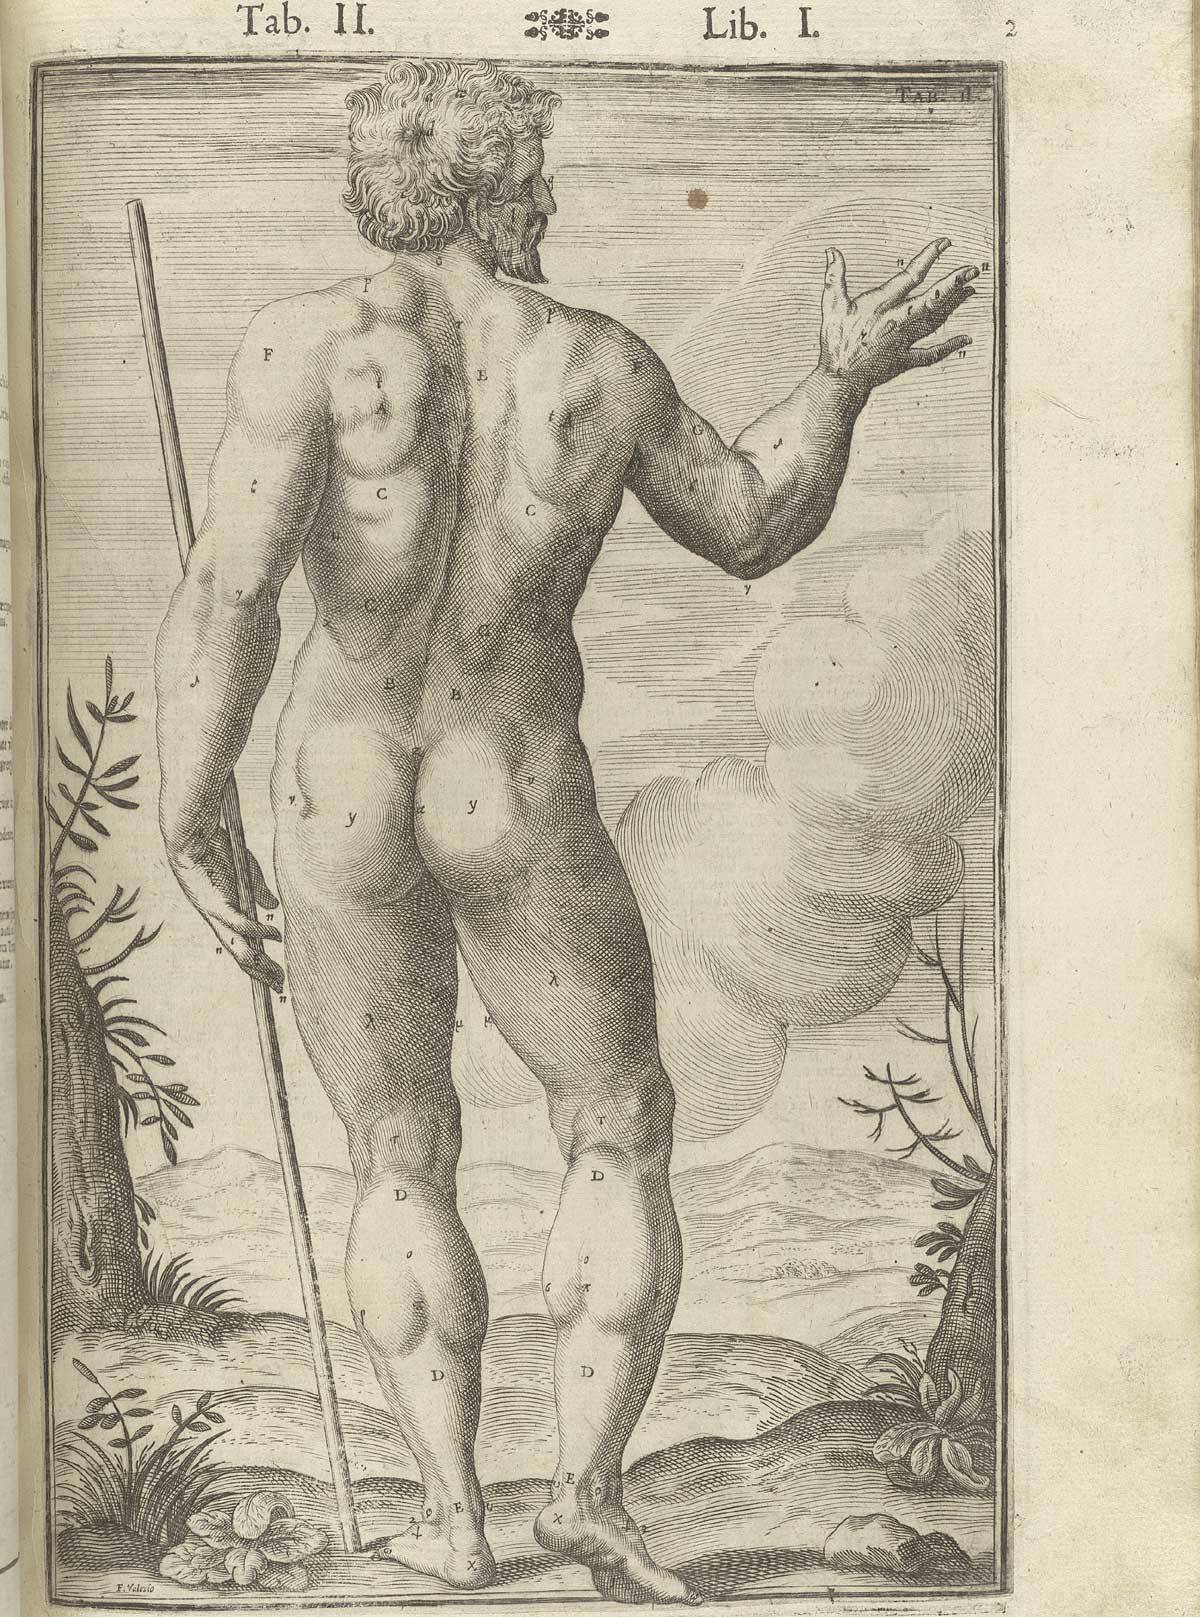 Engraving of a nude male anatomical figure with his back to the viewer in a pastoral setting with a staff in his left hand and a his right hand uplifted pointing to the sky, from Adriaan van de Spiegel and Giulio Cassieri’s De humani corporis fabrica libri decem, Venice, 1627, NLM call no. WZ 250 S755dh 1627.